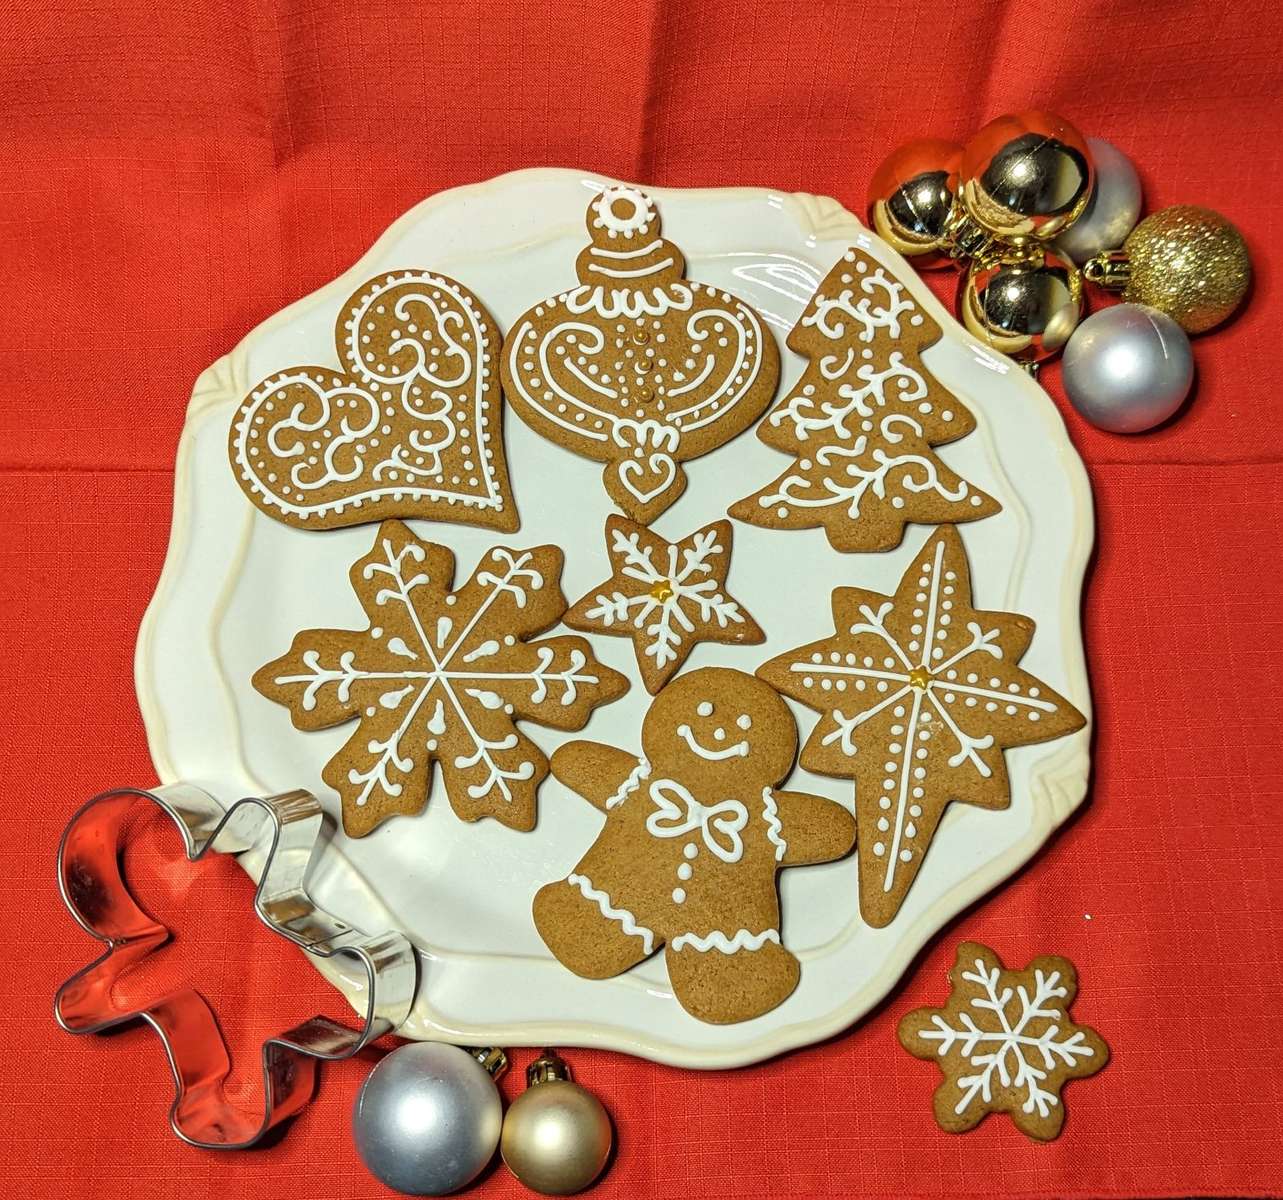 Day 1 Christmas Cookies puzzle online from photo